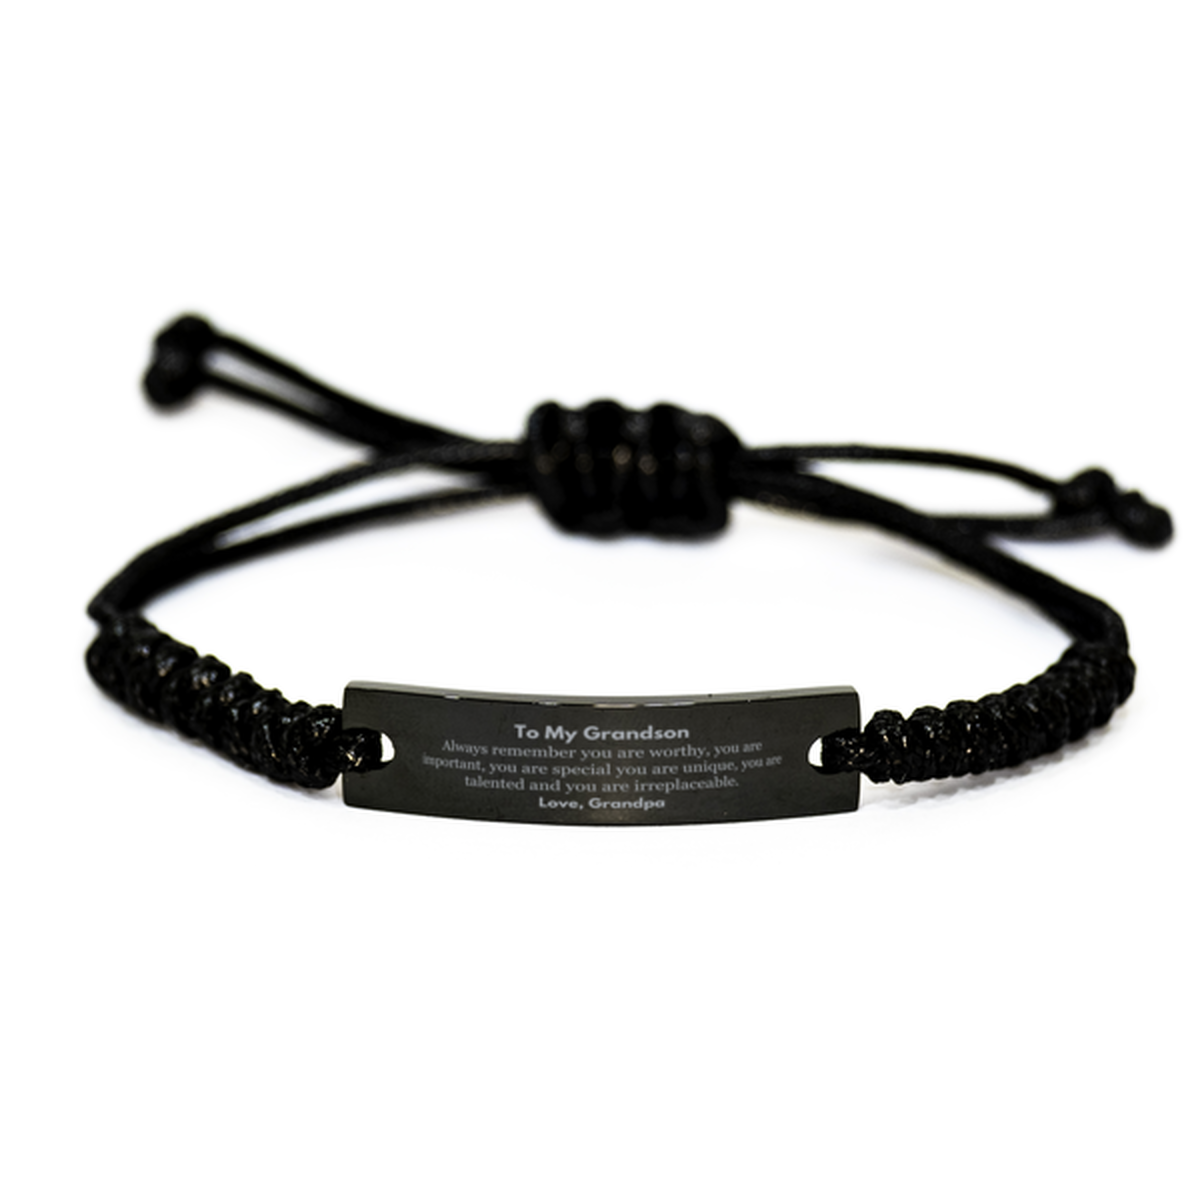 Grandson Birthday Gifts from Grandpa, Inspirational Black Rope Bracelet for Grandson Christmas Graduation Gifts for Grandson Always remember you are worthy, you are important. Love, Grandpa